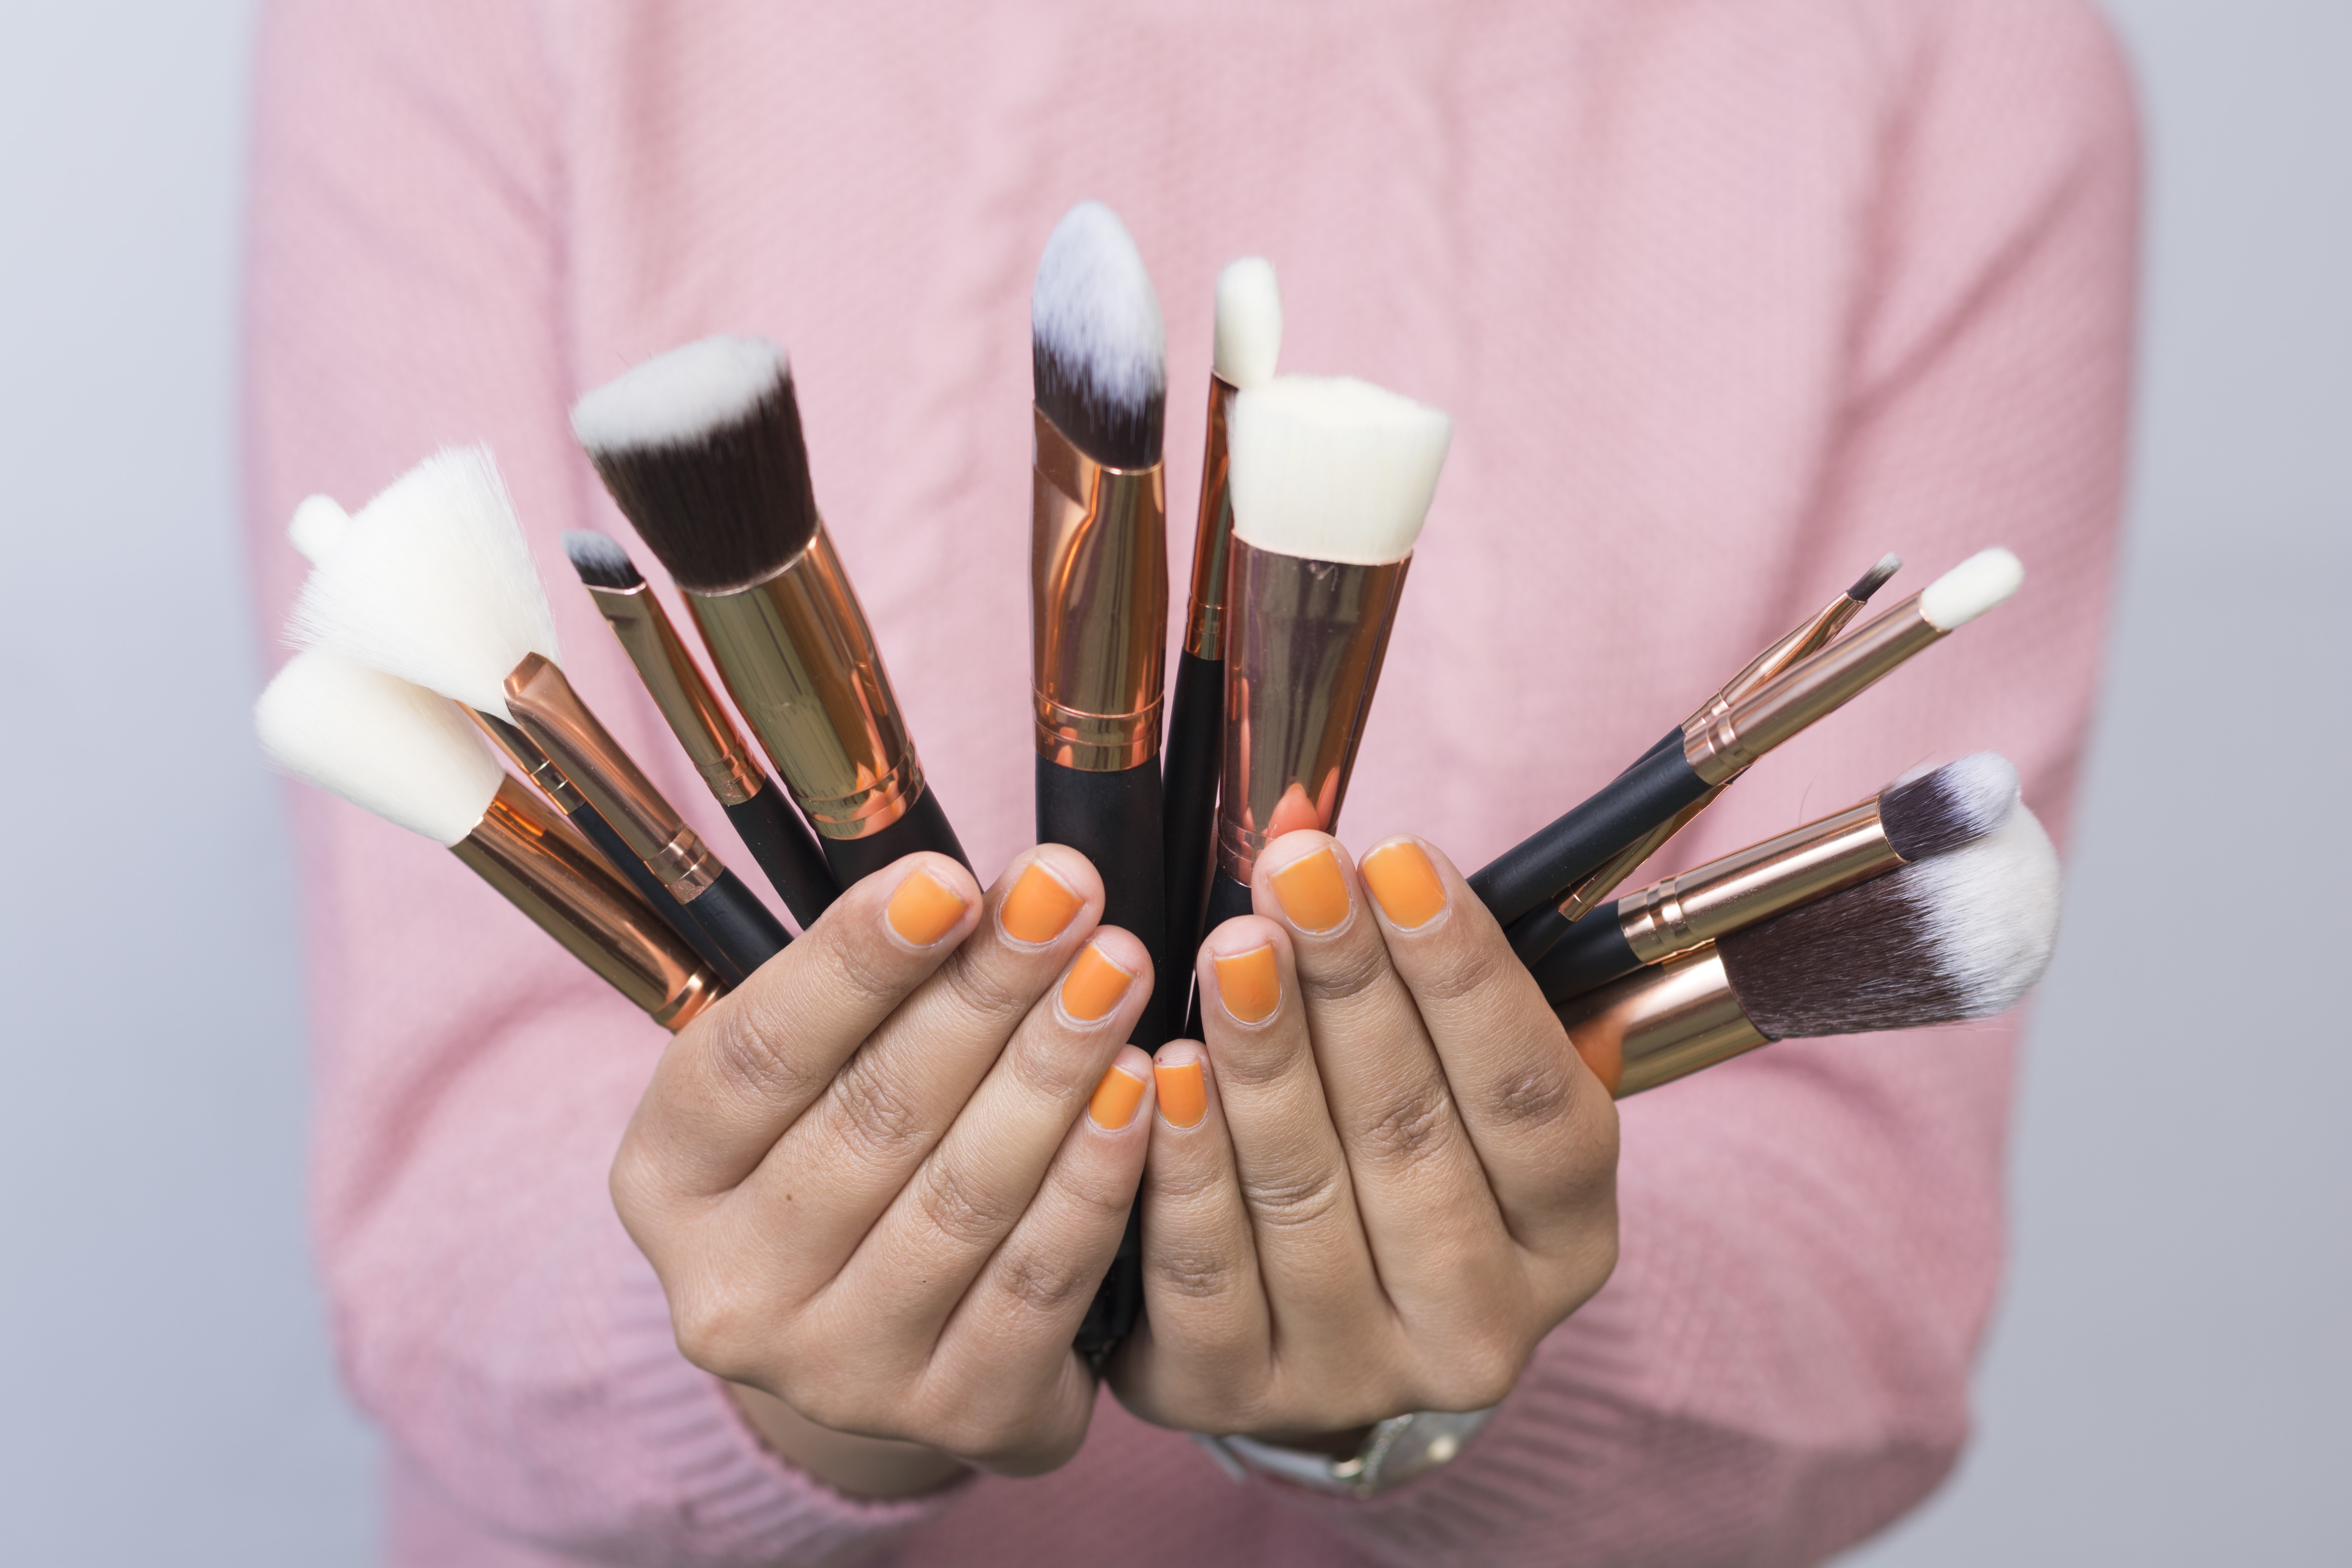 How to clean your make up brushes